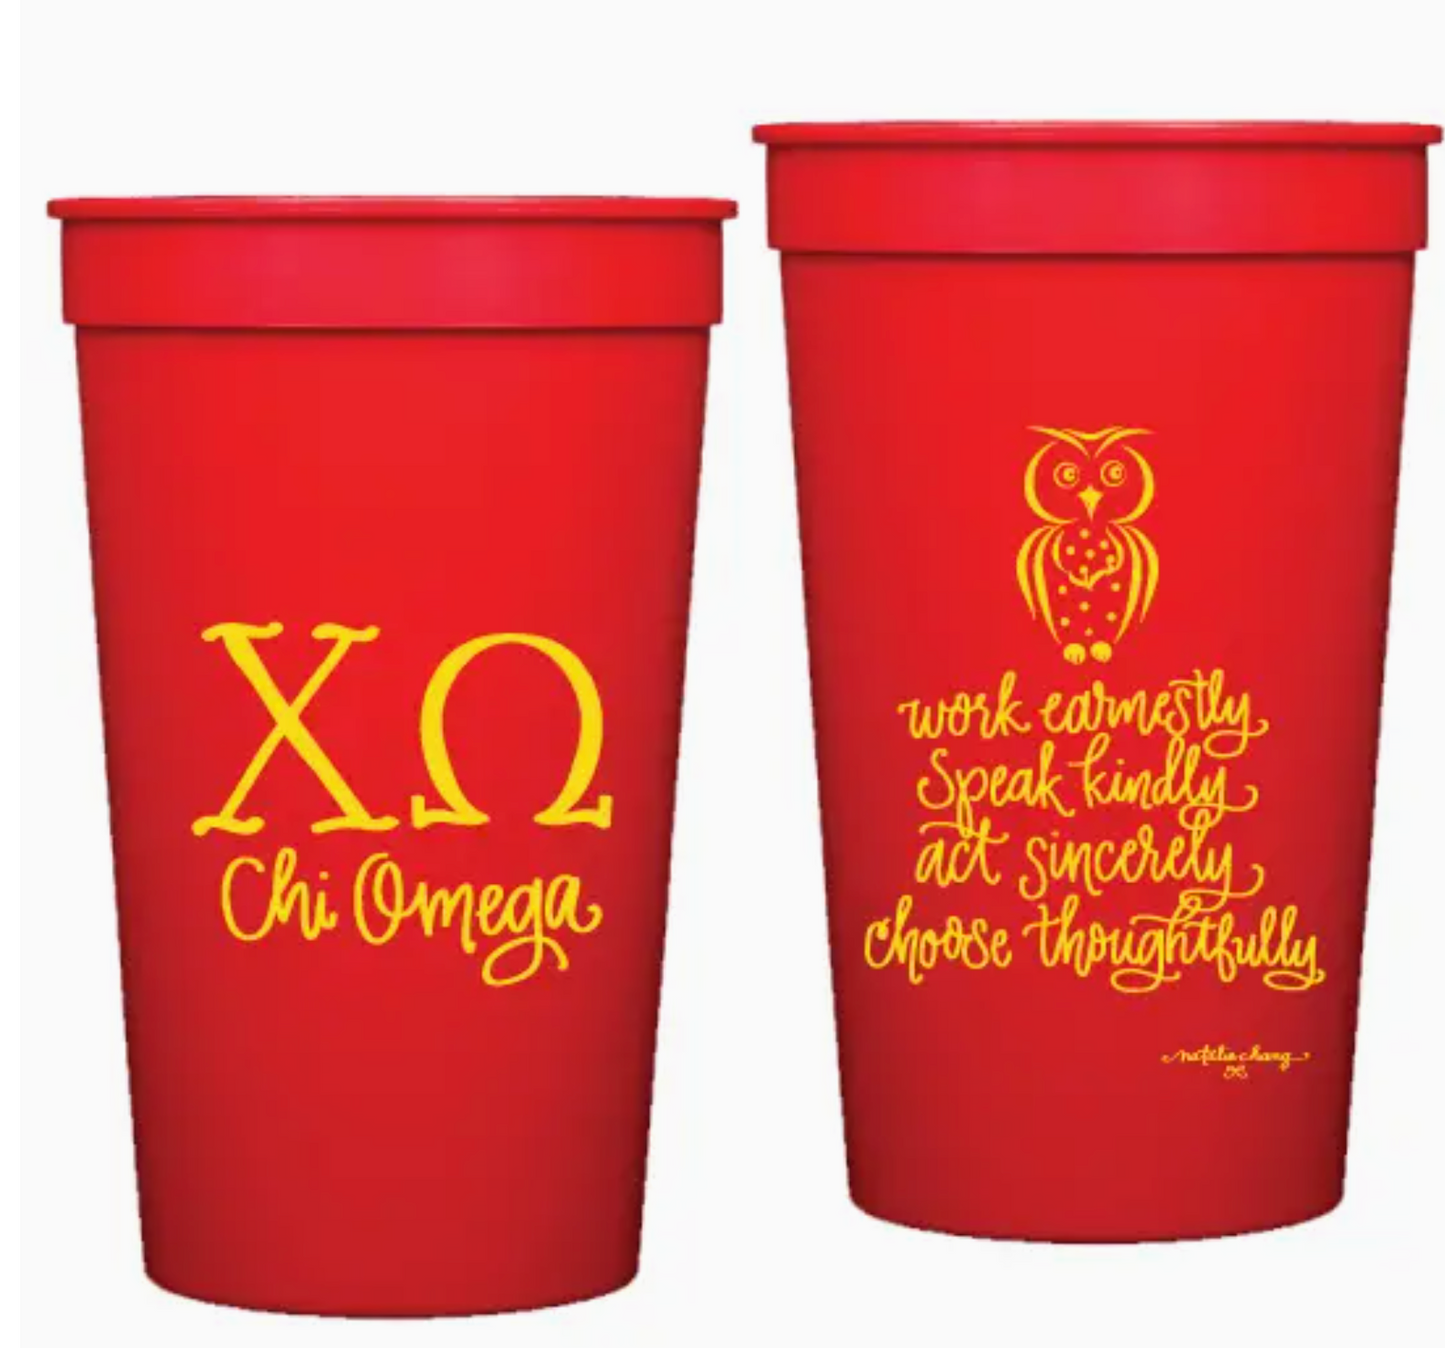 Chi Omega Red Plastic Cups With Dots